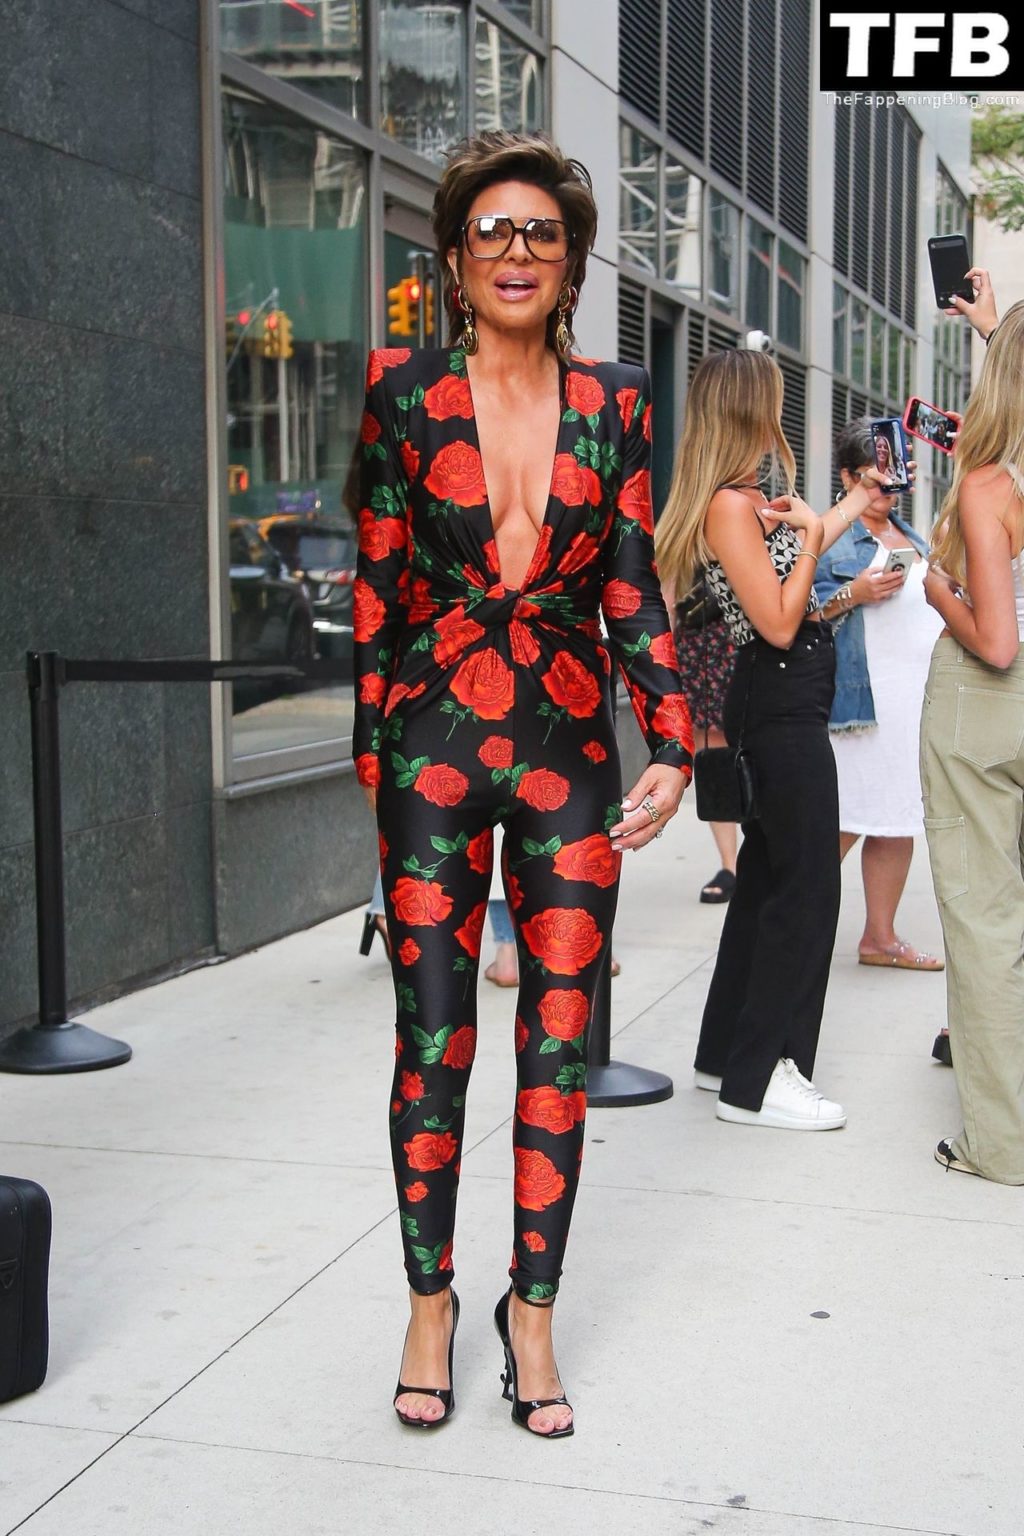 Lisa Rinna Rocks a Head-to-Toe YSL Look Arriving to Watch What Happens Live in NYC (52 Photos)